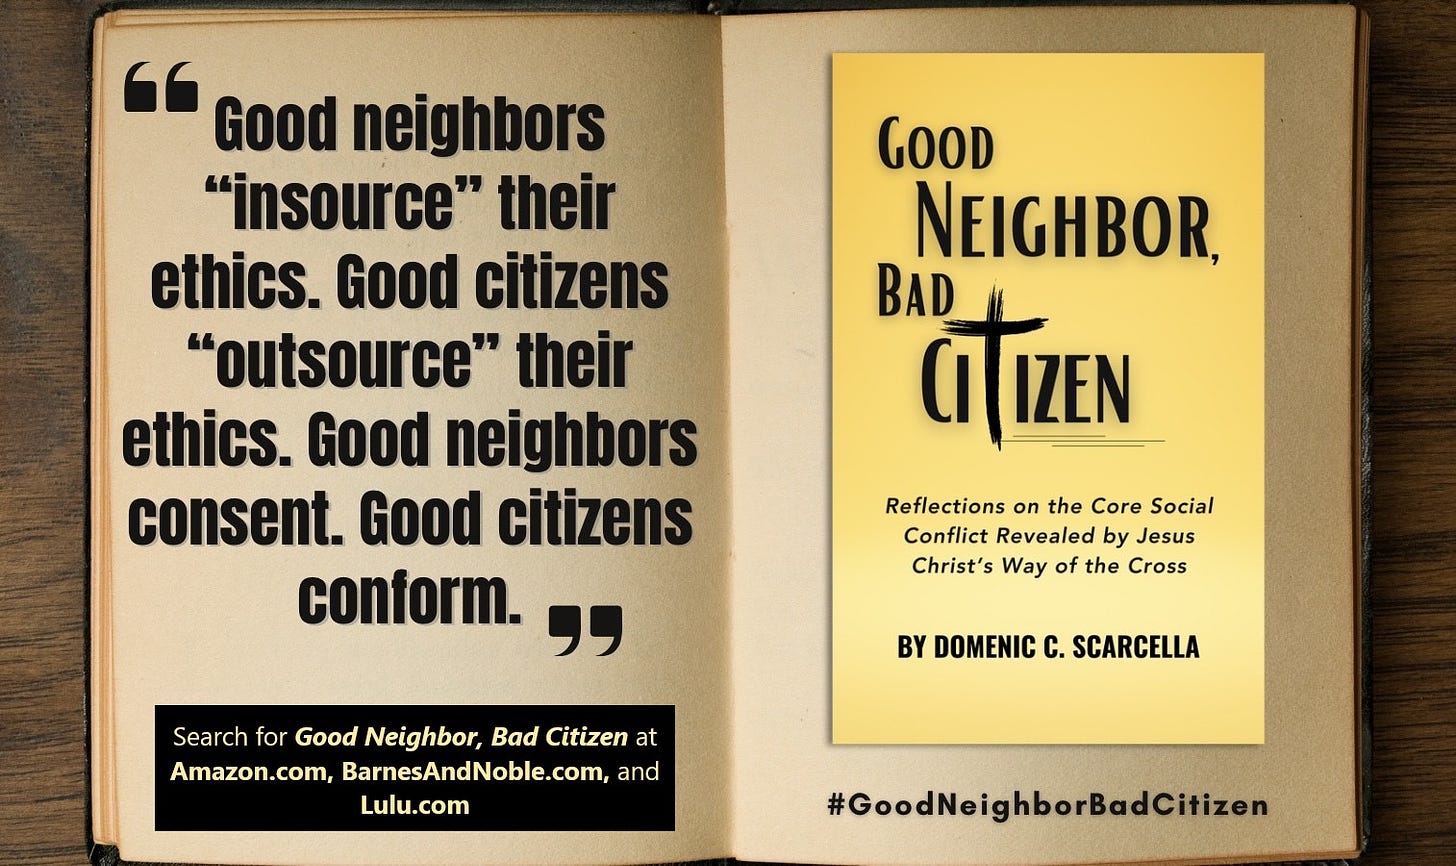 Front cover of the book 'Good Neighbor, Bad Citizen' next to a quote from the book that says, "Good neighbors 'insource' their ethics.  Good citizens 'outsource' their ethics.  Good neighbors consent.  Good citizens conform."